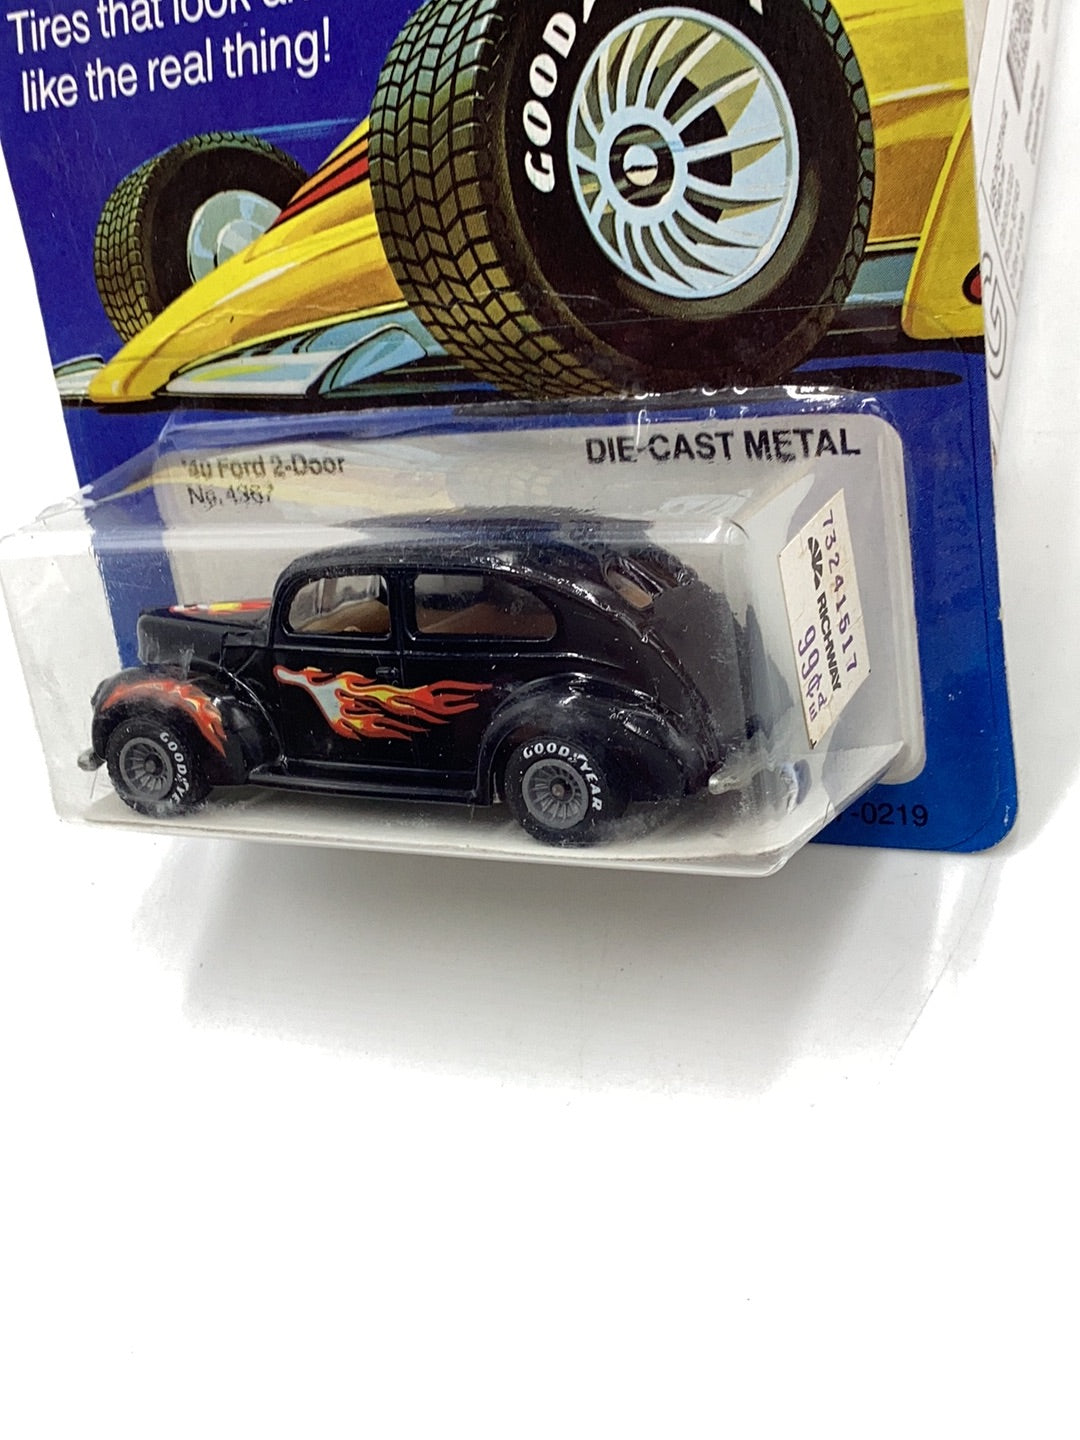 Hot Wheels Real Riders 40 Ford 2-door with protector